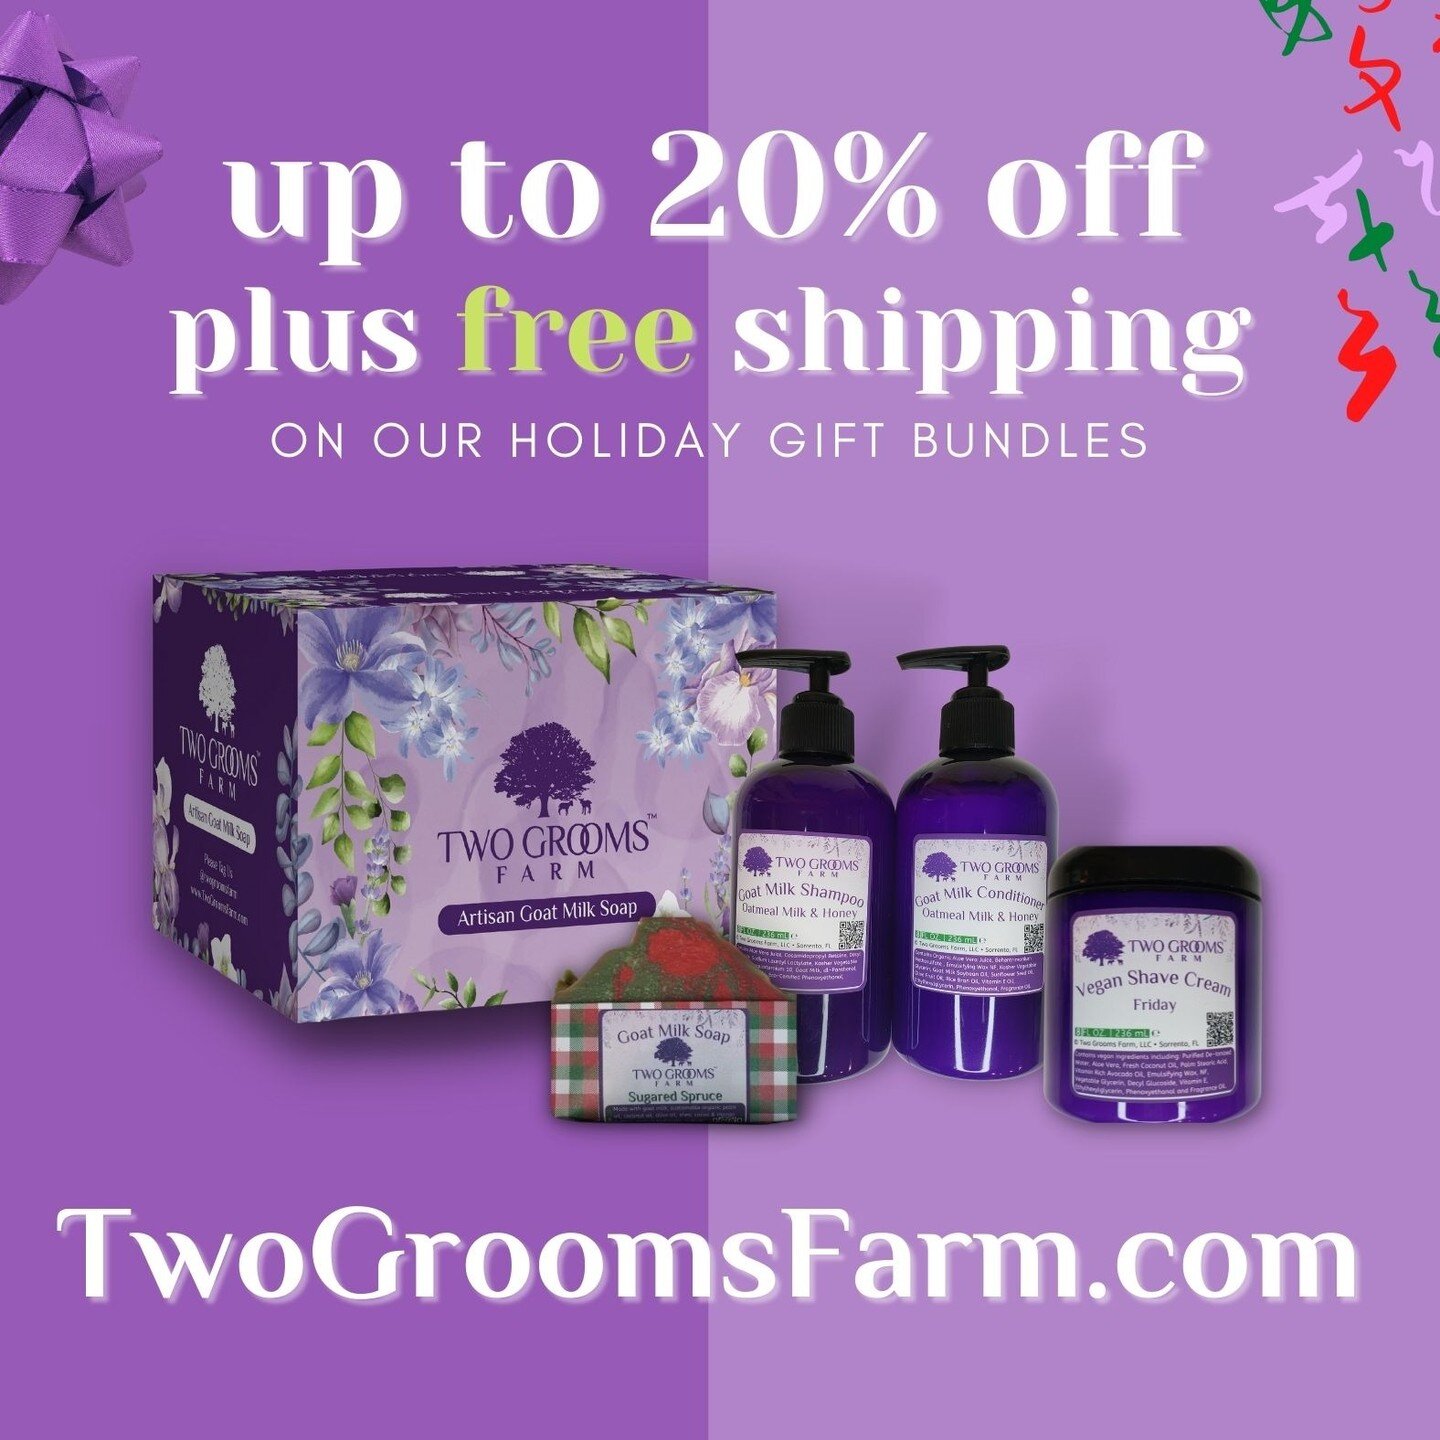 Black Friday kinda sucked this year, right? Don't worry! We've created some wonderful gift bundles. Enjoy 10 to 20% off! Plus free shipping on all orders over $20. #TwoGrooomsFarm #goatmilksoap #HolidayGiftIdeas #FriendsOfTheGrooms #Farmstay